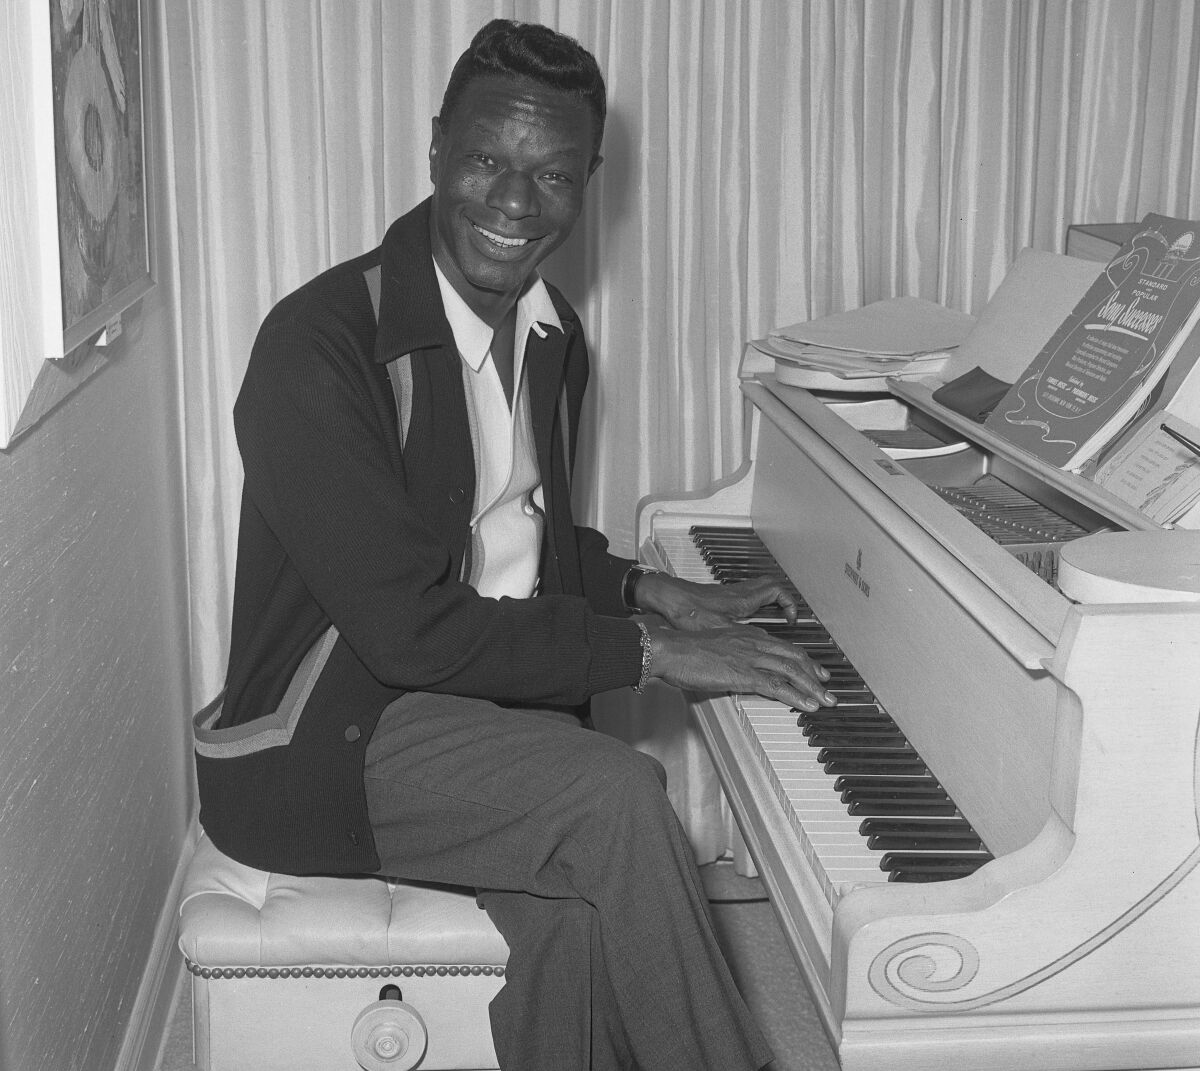 A man smiles while seated at a white piano.